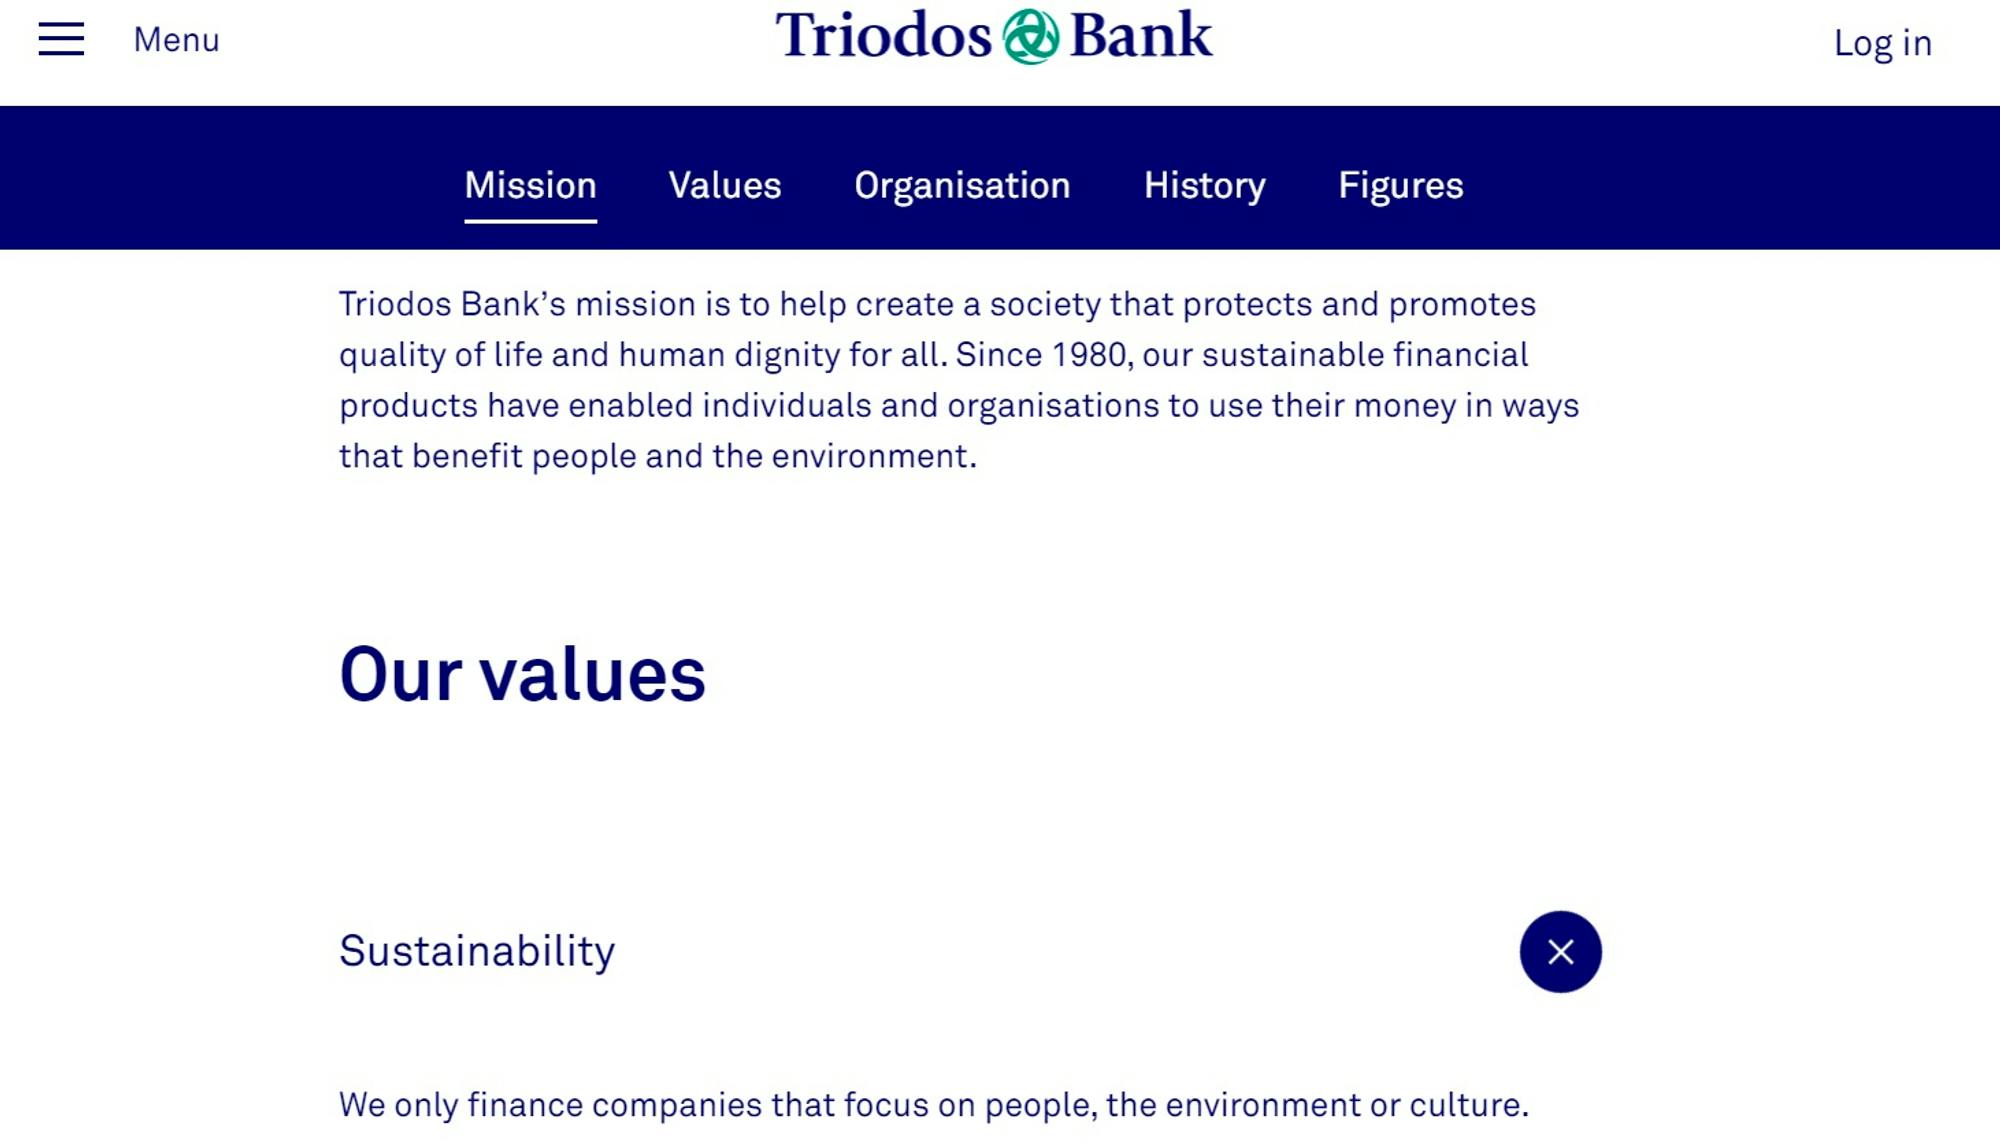 Screenshot of Triodos's website about their "Mission"